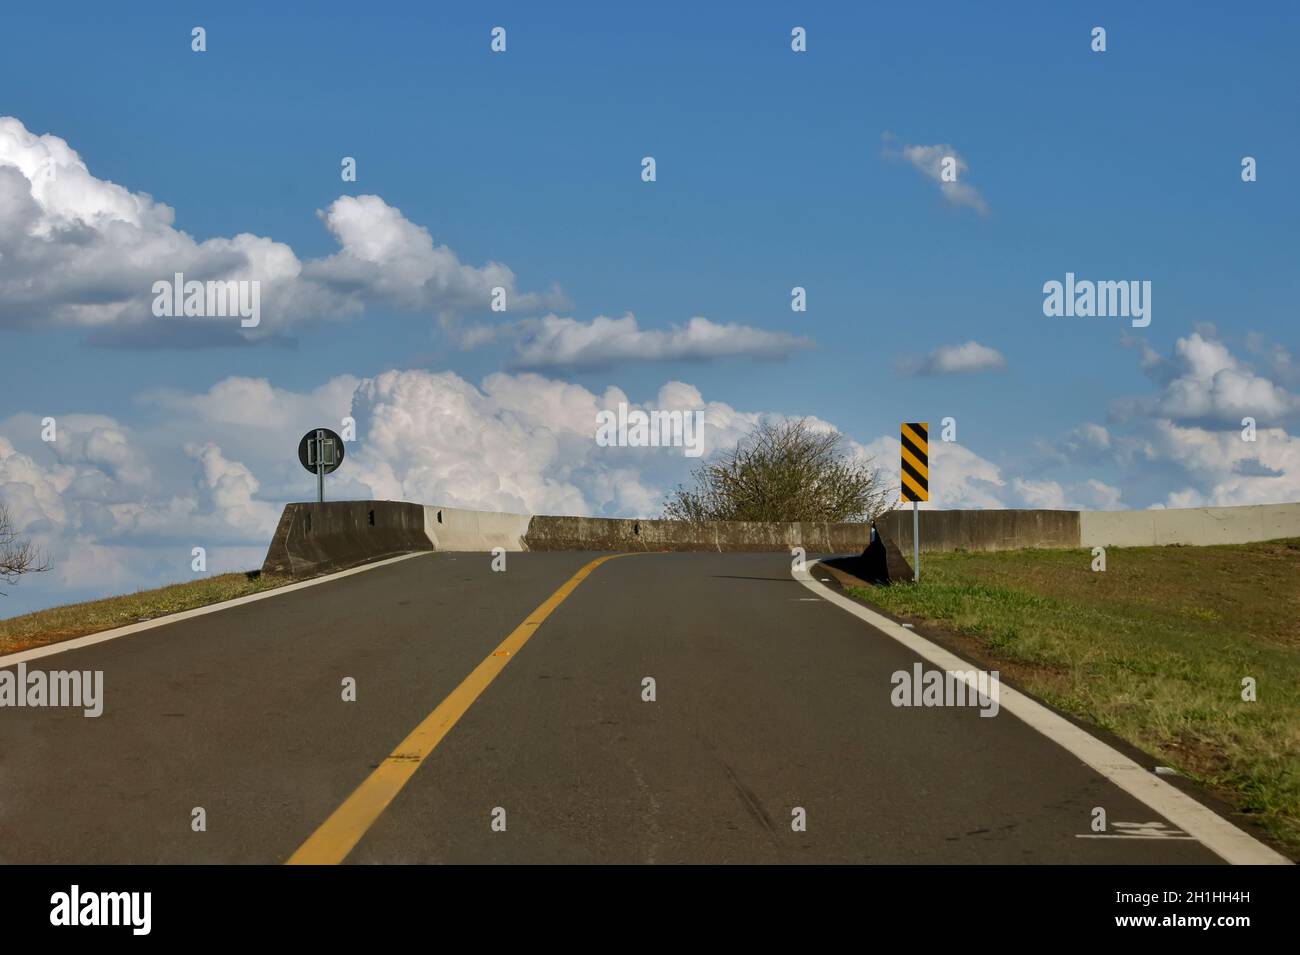 Driver's point of view of a car on an uphill climb that gives access to a highway return bridge. Stock Photo